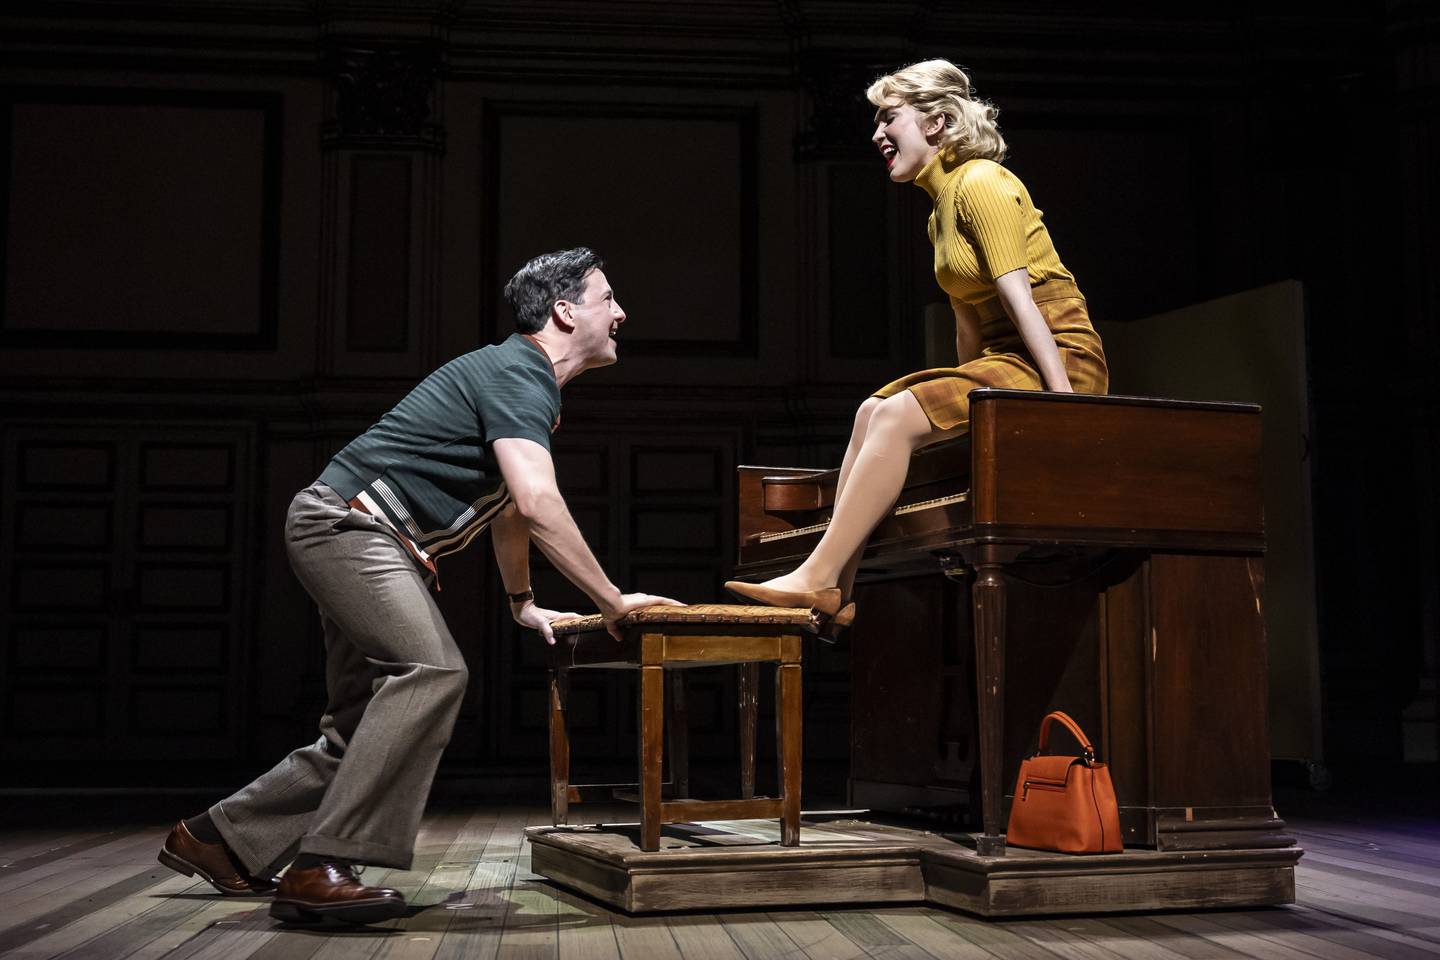 Christopher Kale Jones (left) plays Barry Mann and Rebecca Hurd plays Cynthia Weil, Mann’s wife and songwriting partner, in Paramount Theatre's Beautiful: The Carole King Musical. Credit: Liz Lauren